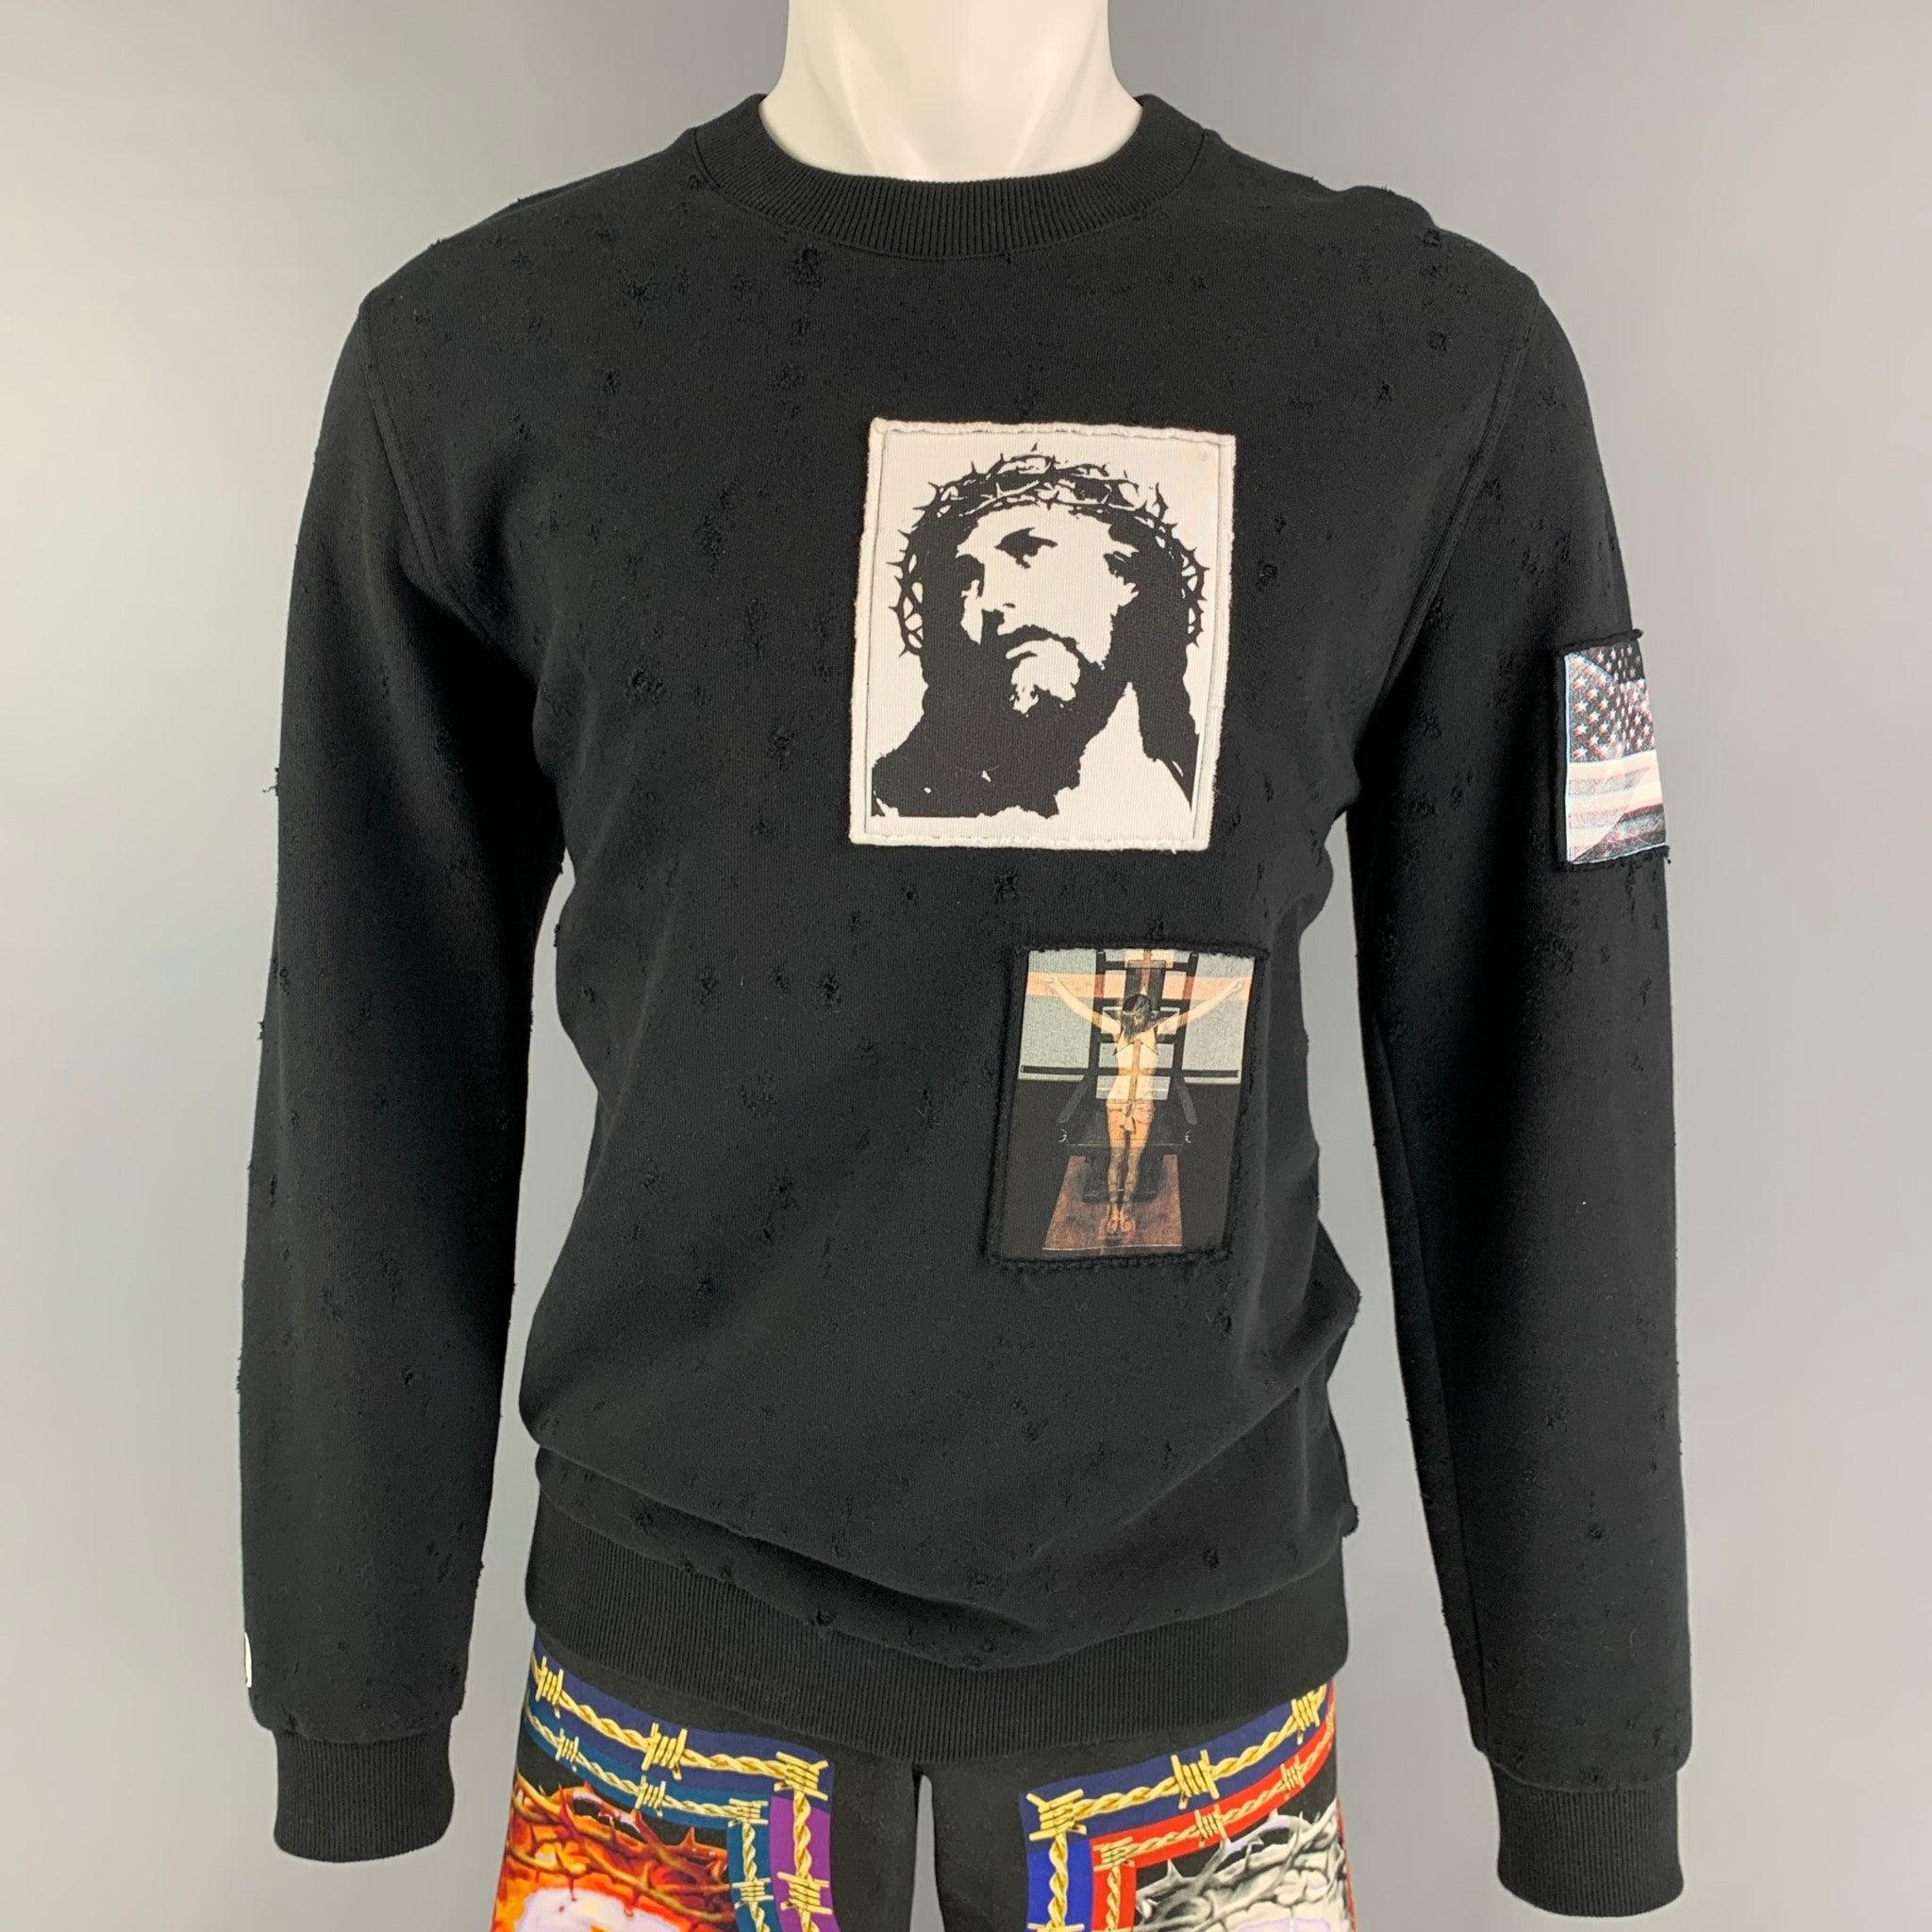 GIVENCHY by Ricardo Tisci Size S/M Cotton Oversized Sweatshirt Short Set In Good Condition For Sale In San Francisco, CA